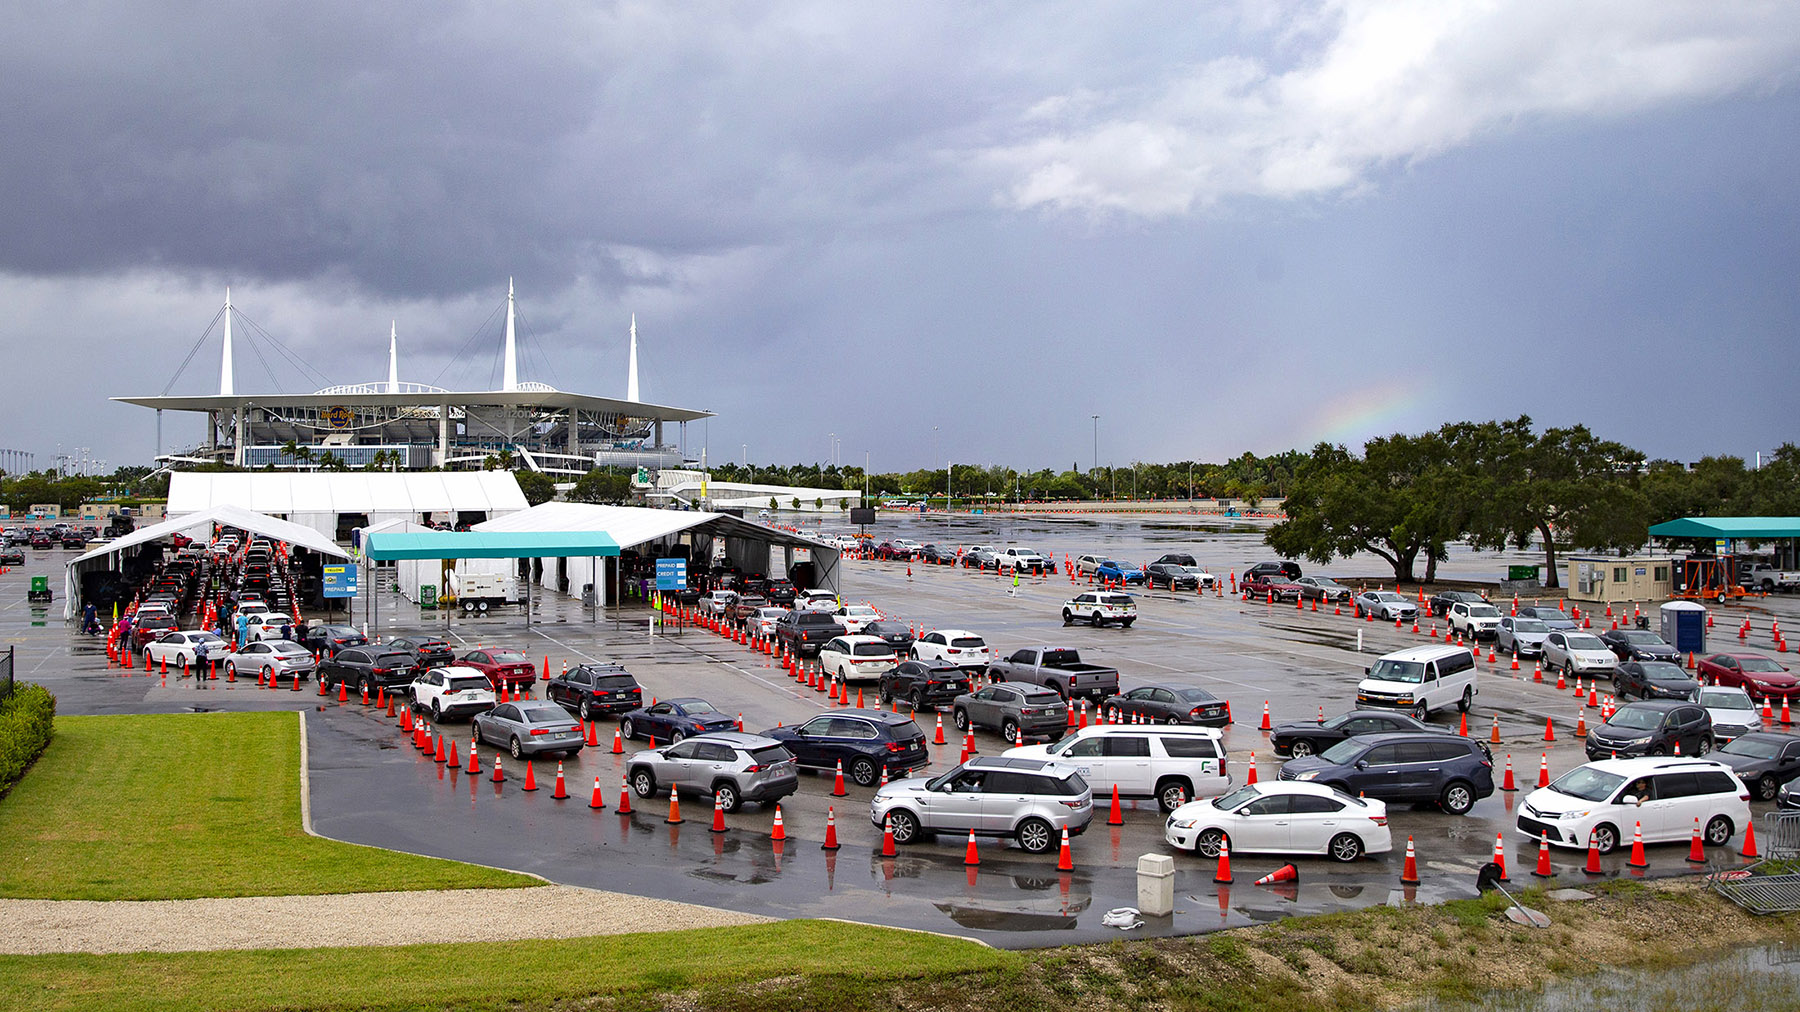 Vehicles line up at the COVID-19 drive-thru testing center at the Hard Rock Stadium in Miami Gardens, Florida, on Sunday, November 22. 